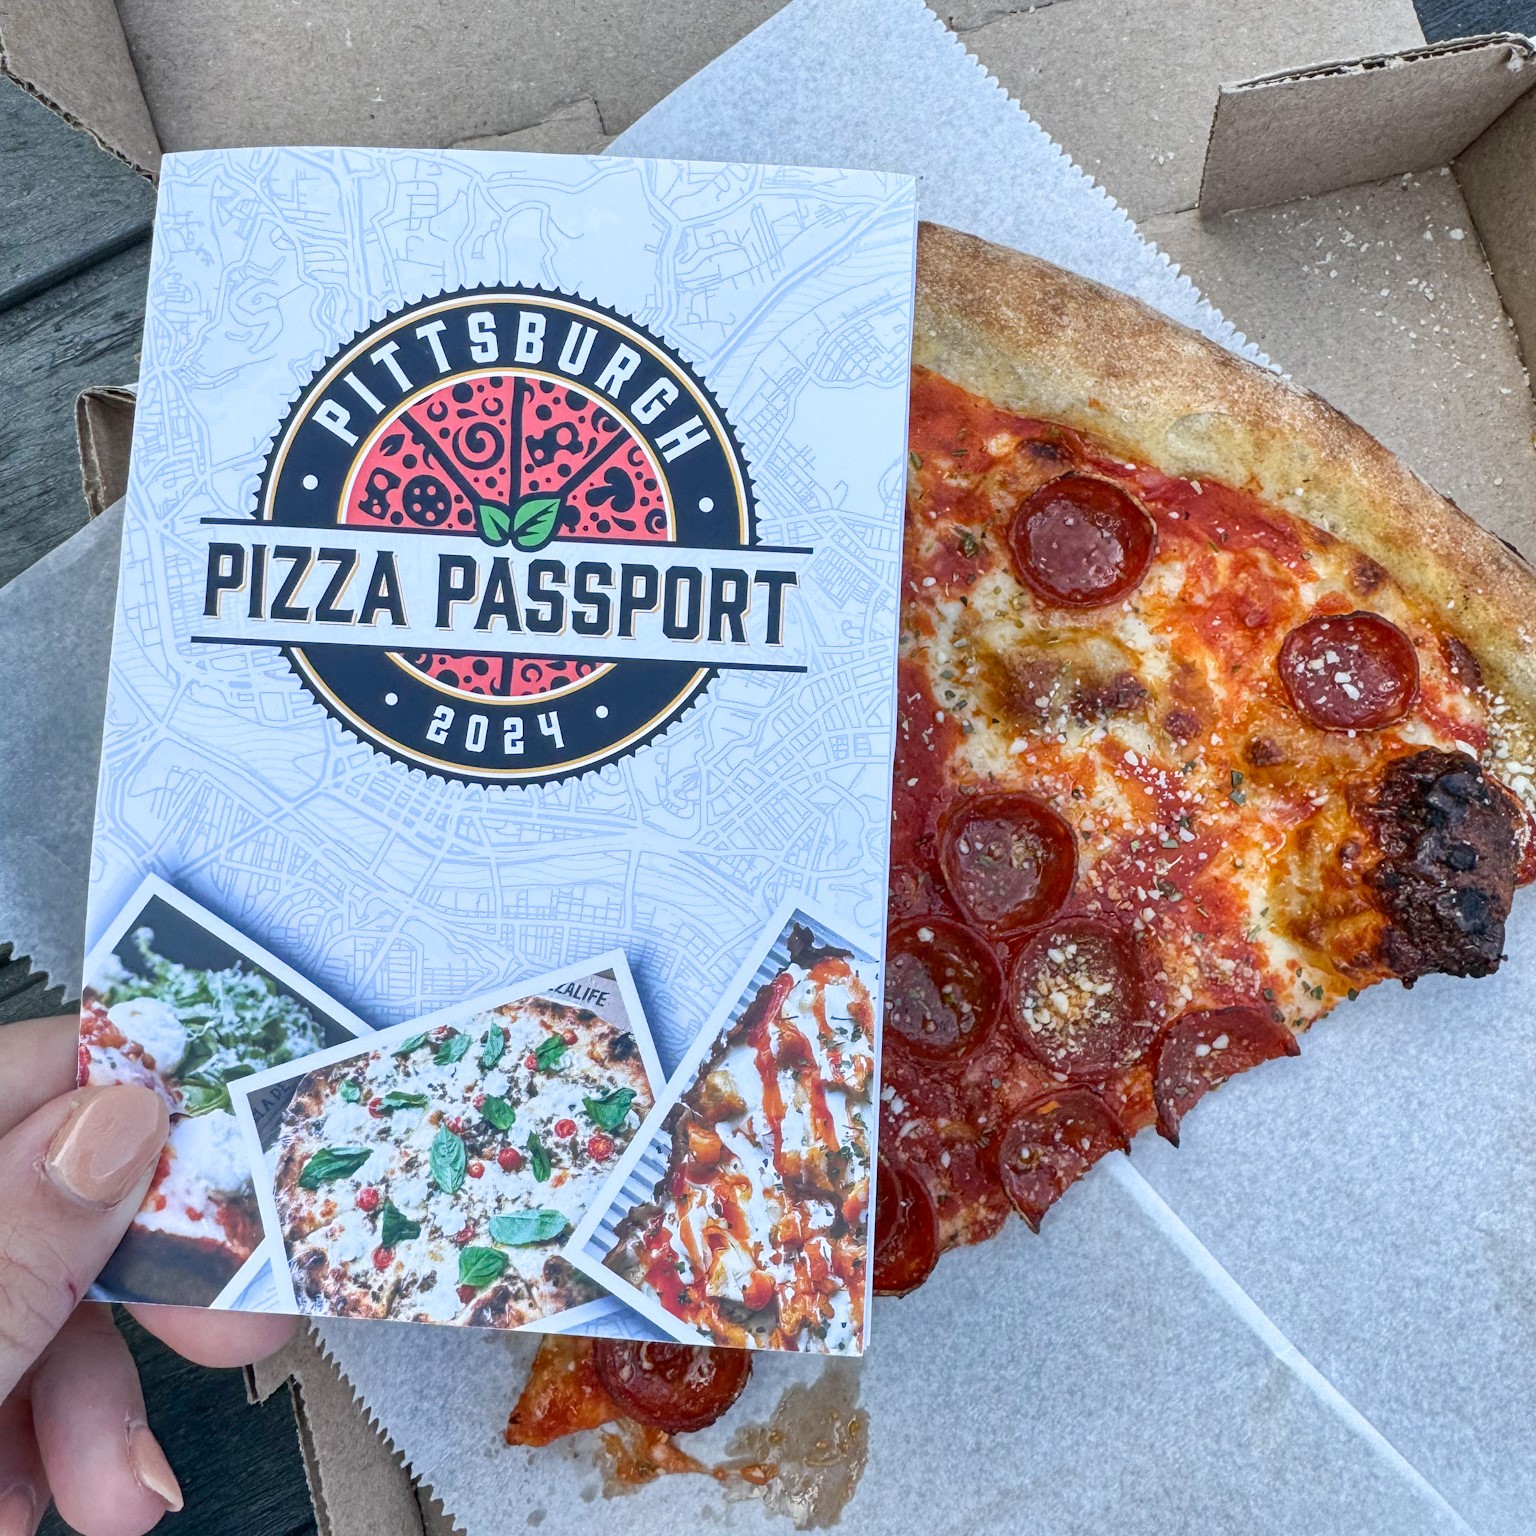 The Pittsburgh Pizza Passport book held up next to a slice of pizza from Pizzeria Davide.